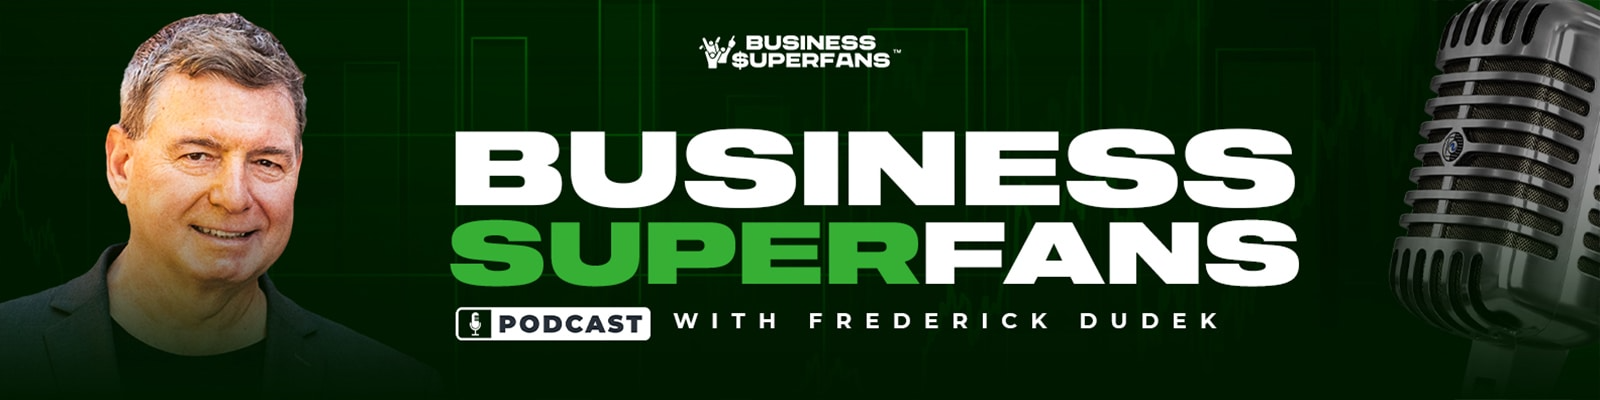 The Business Superfans Podcast